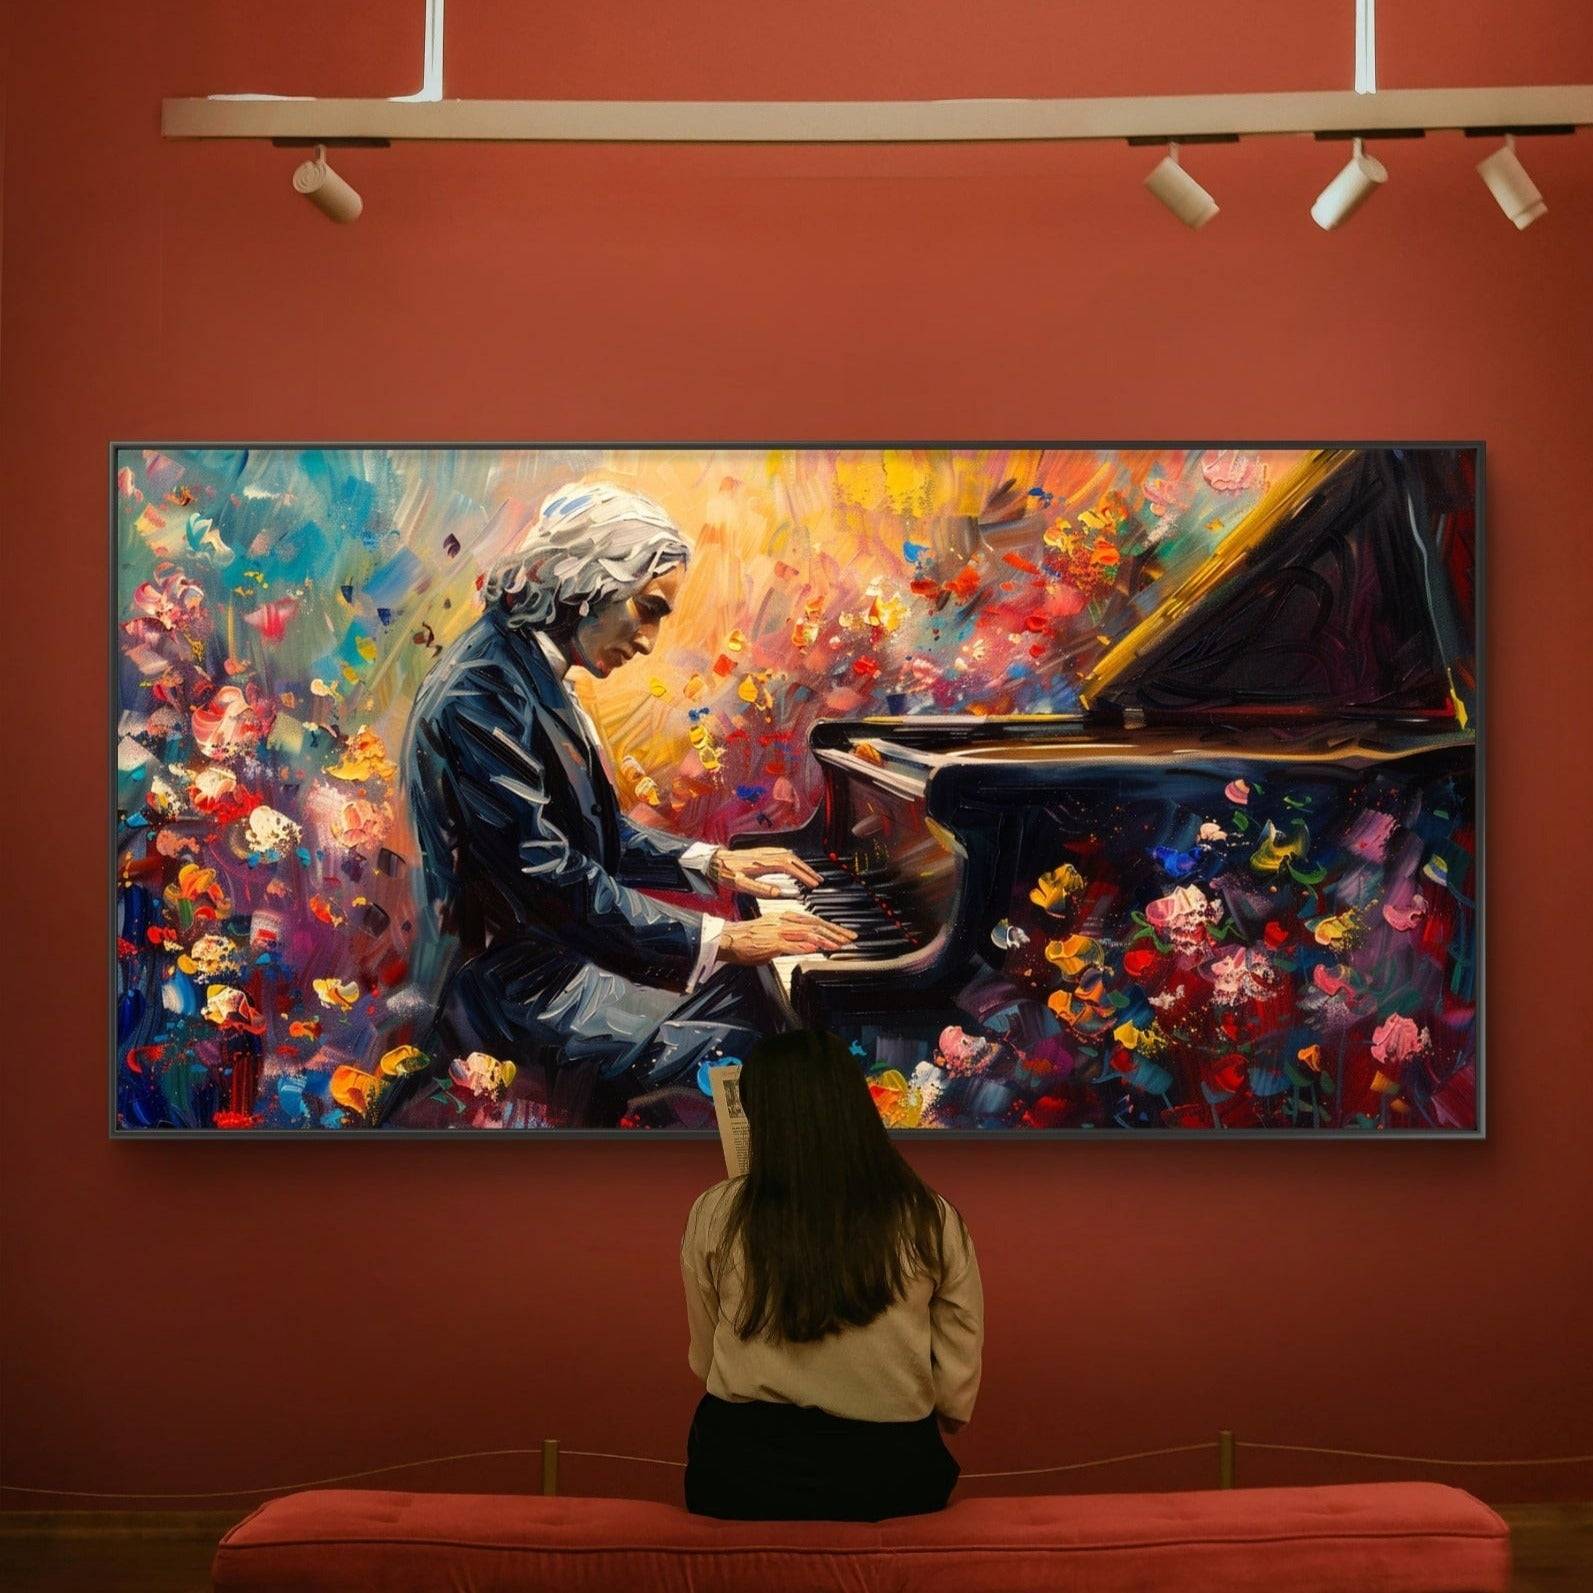 Pianist painting